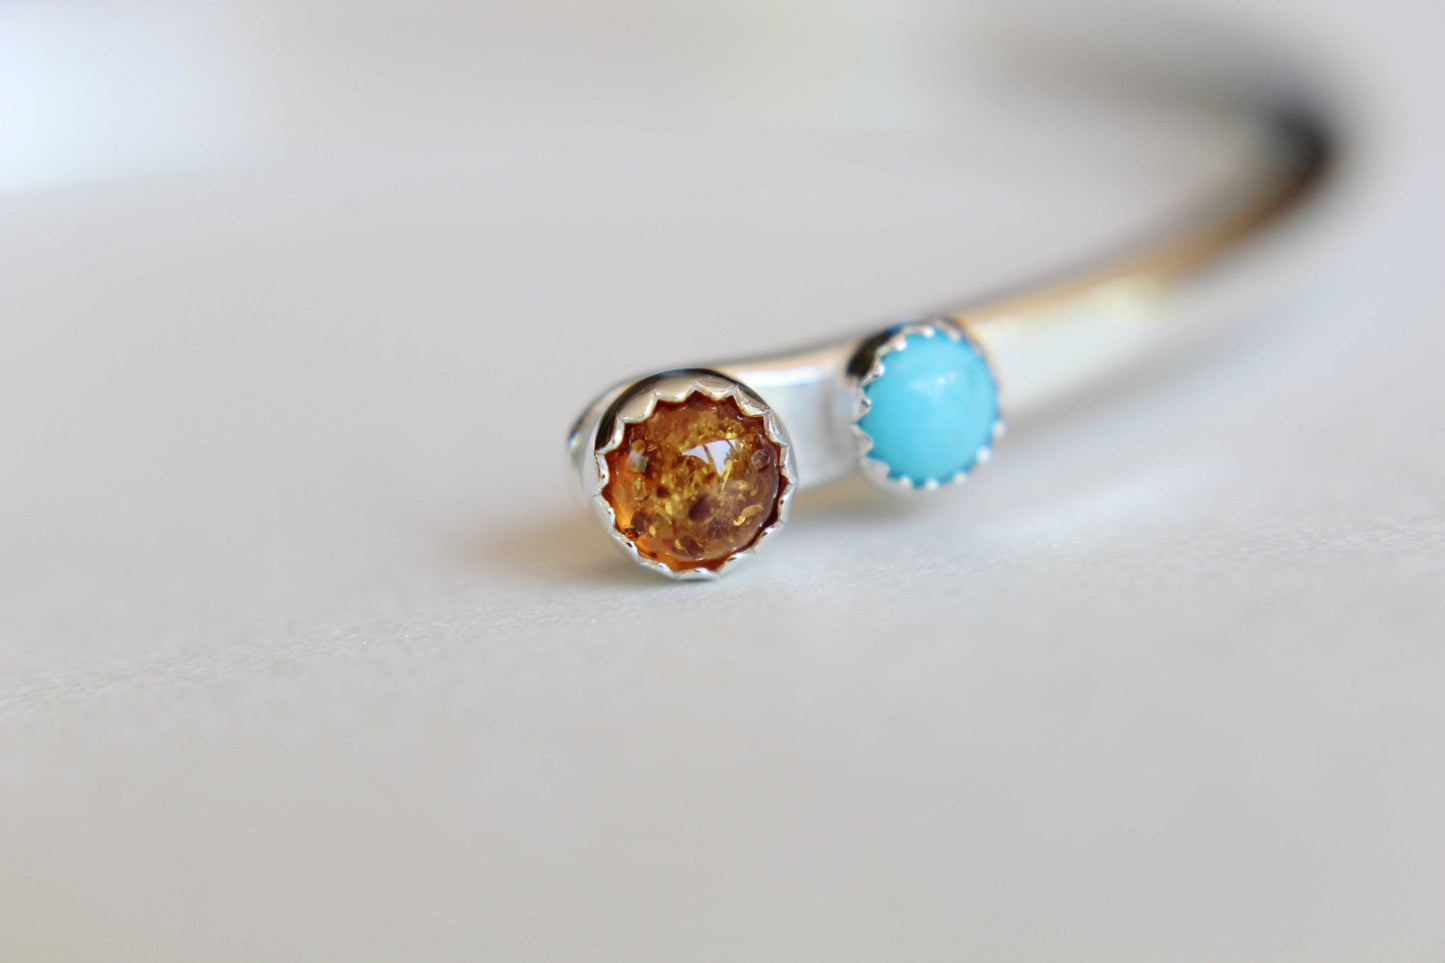 Double Gemstone Bracelet, Sterling Silver Bracelet, Amber Cuff Bracelet, Sterling Turquoise Jewelry, Amber and Turquoise Cuff, Boho, Gift